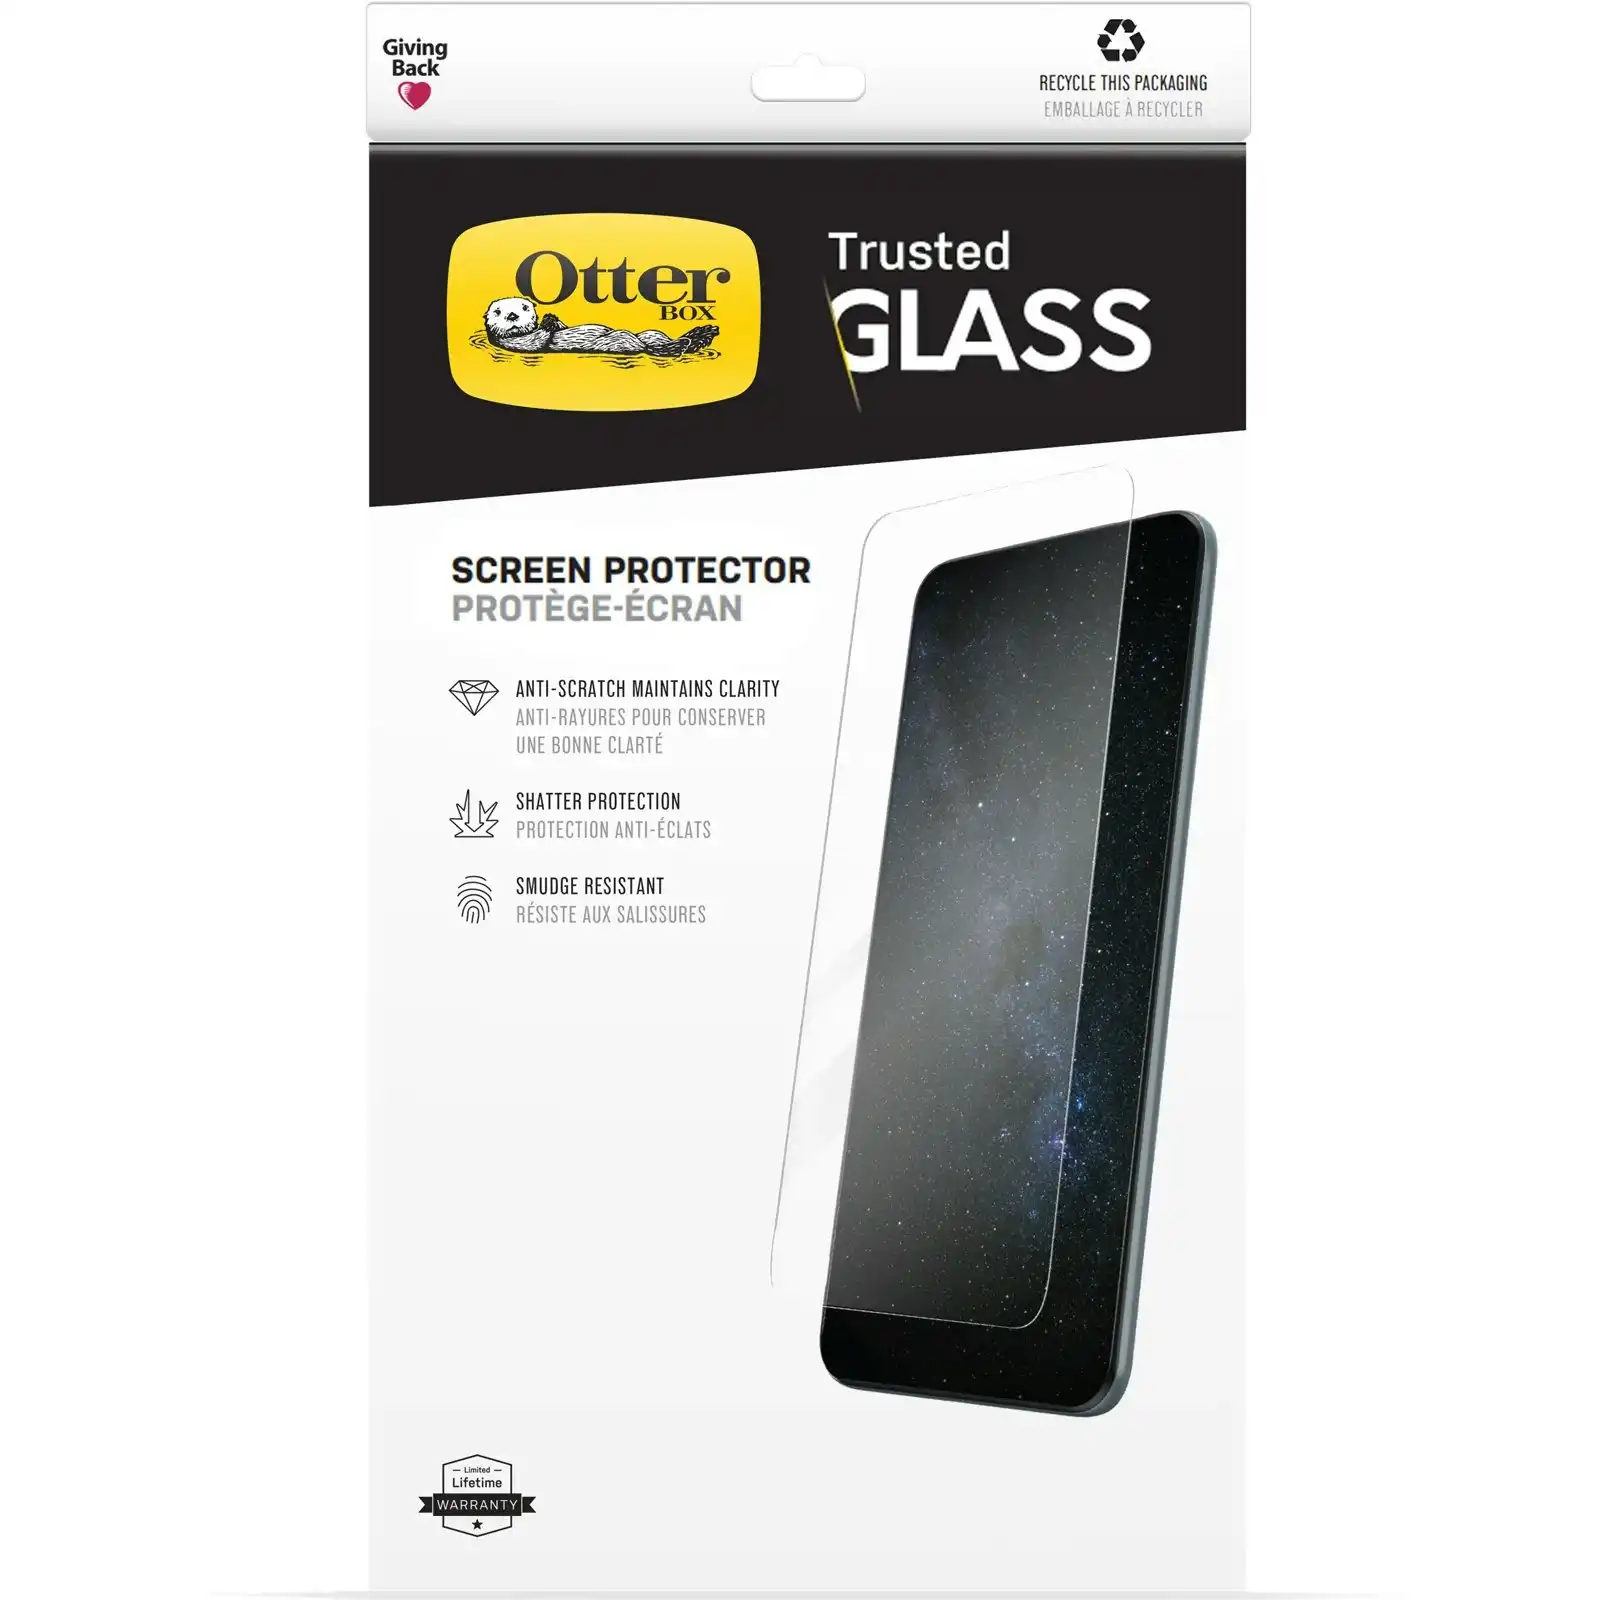 Otterbox Trusted Glass Screen Protector For Iphone 14/13/13 Pro